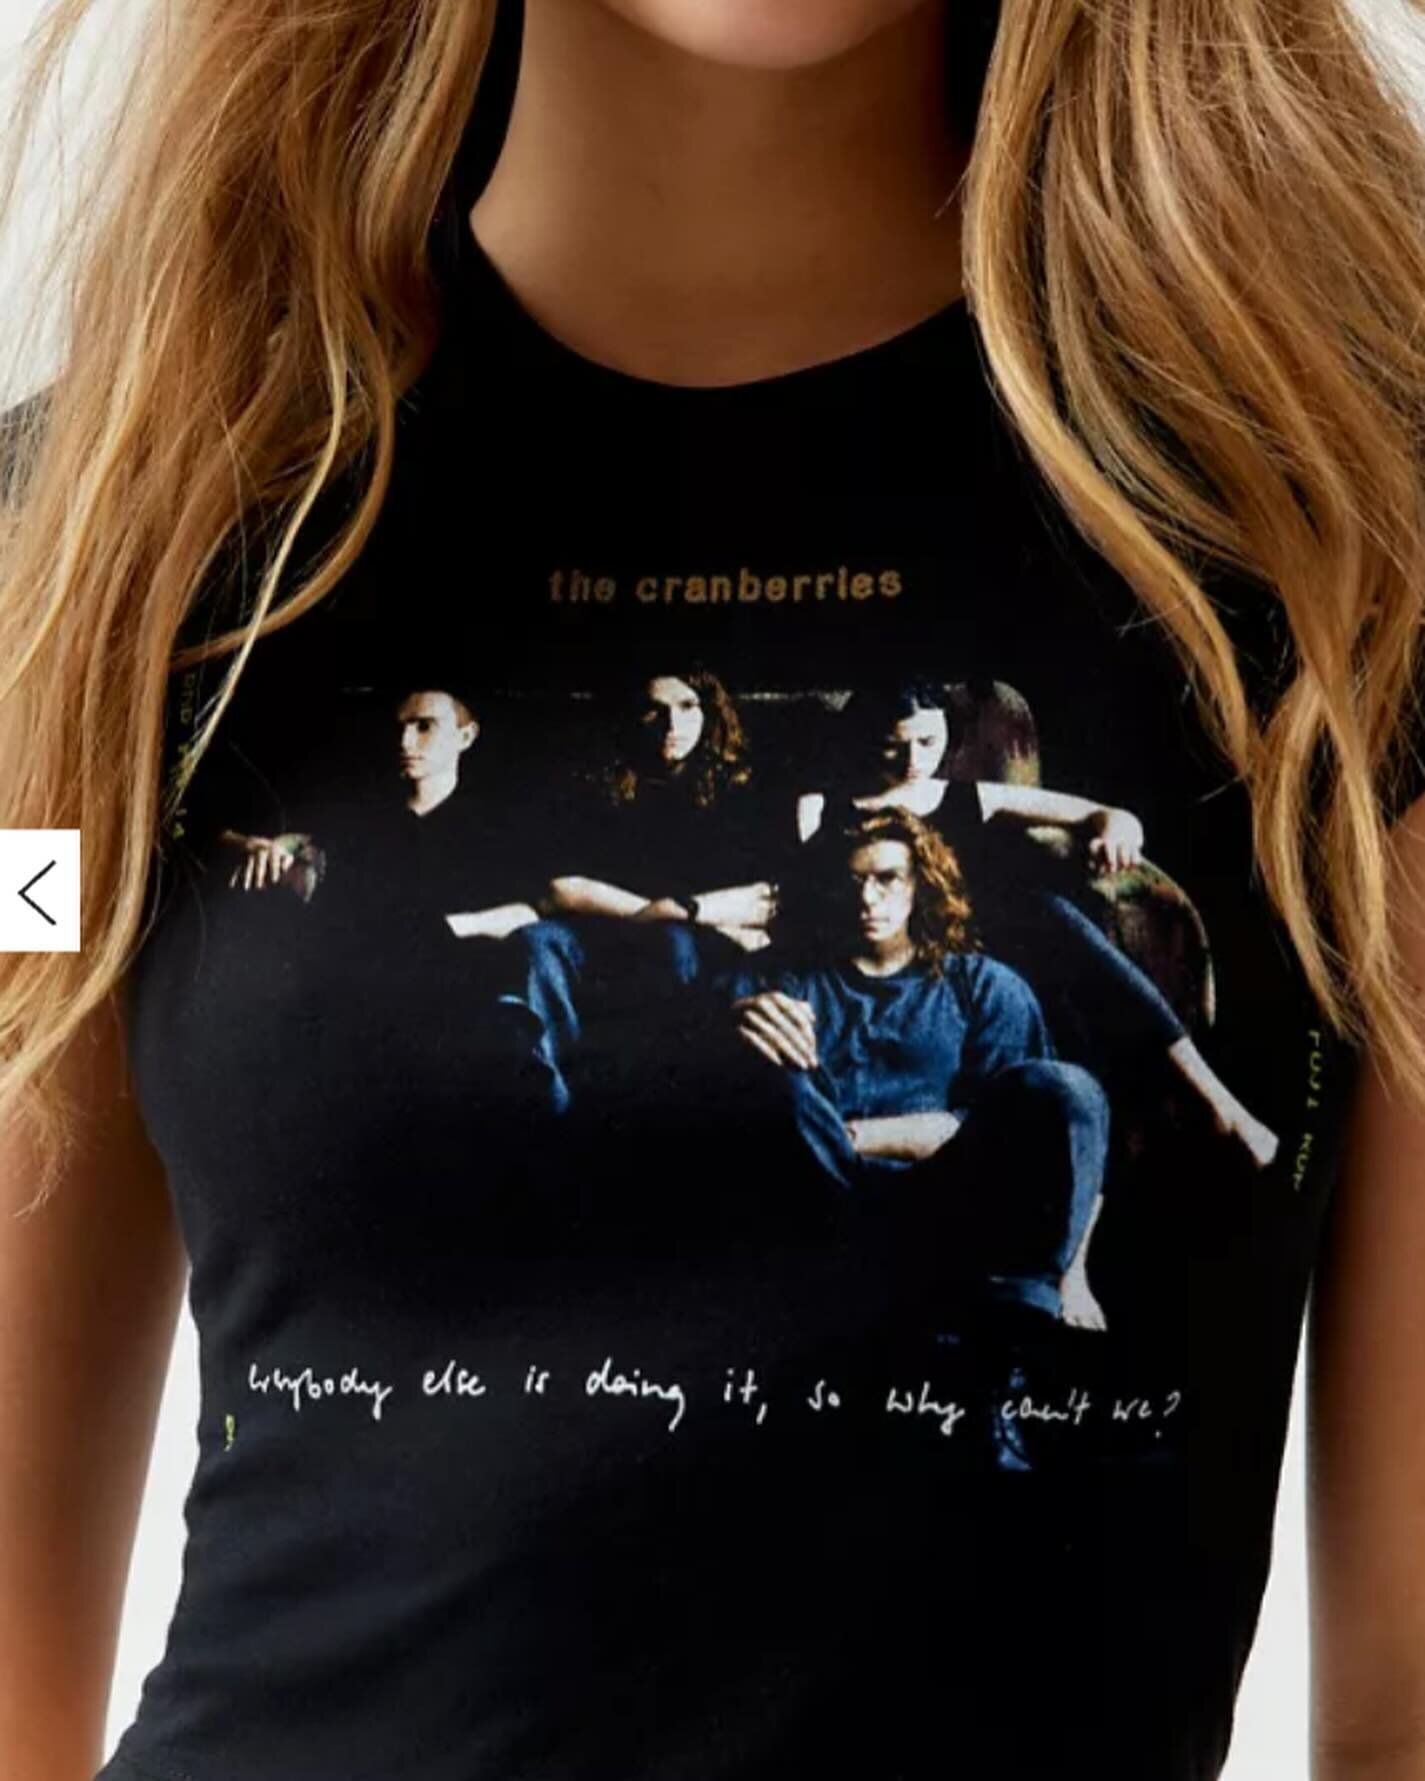 The Cranberries baby tee @urbanoutfitters already SOLD OUT 🔥🔥🔥 #Thecranberries #babytee #alternative #bandtee